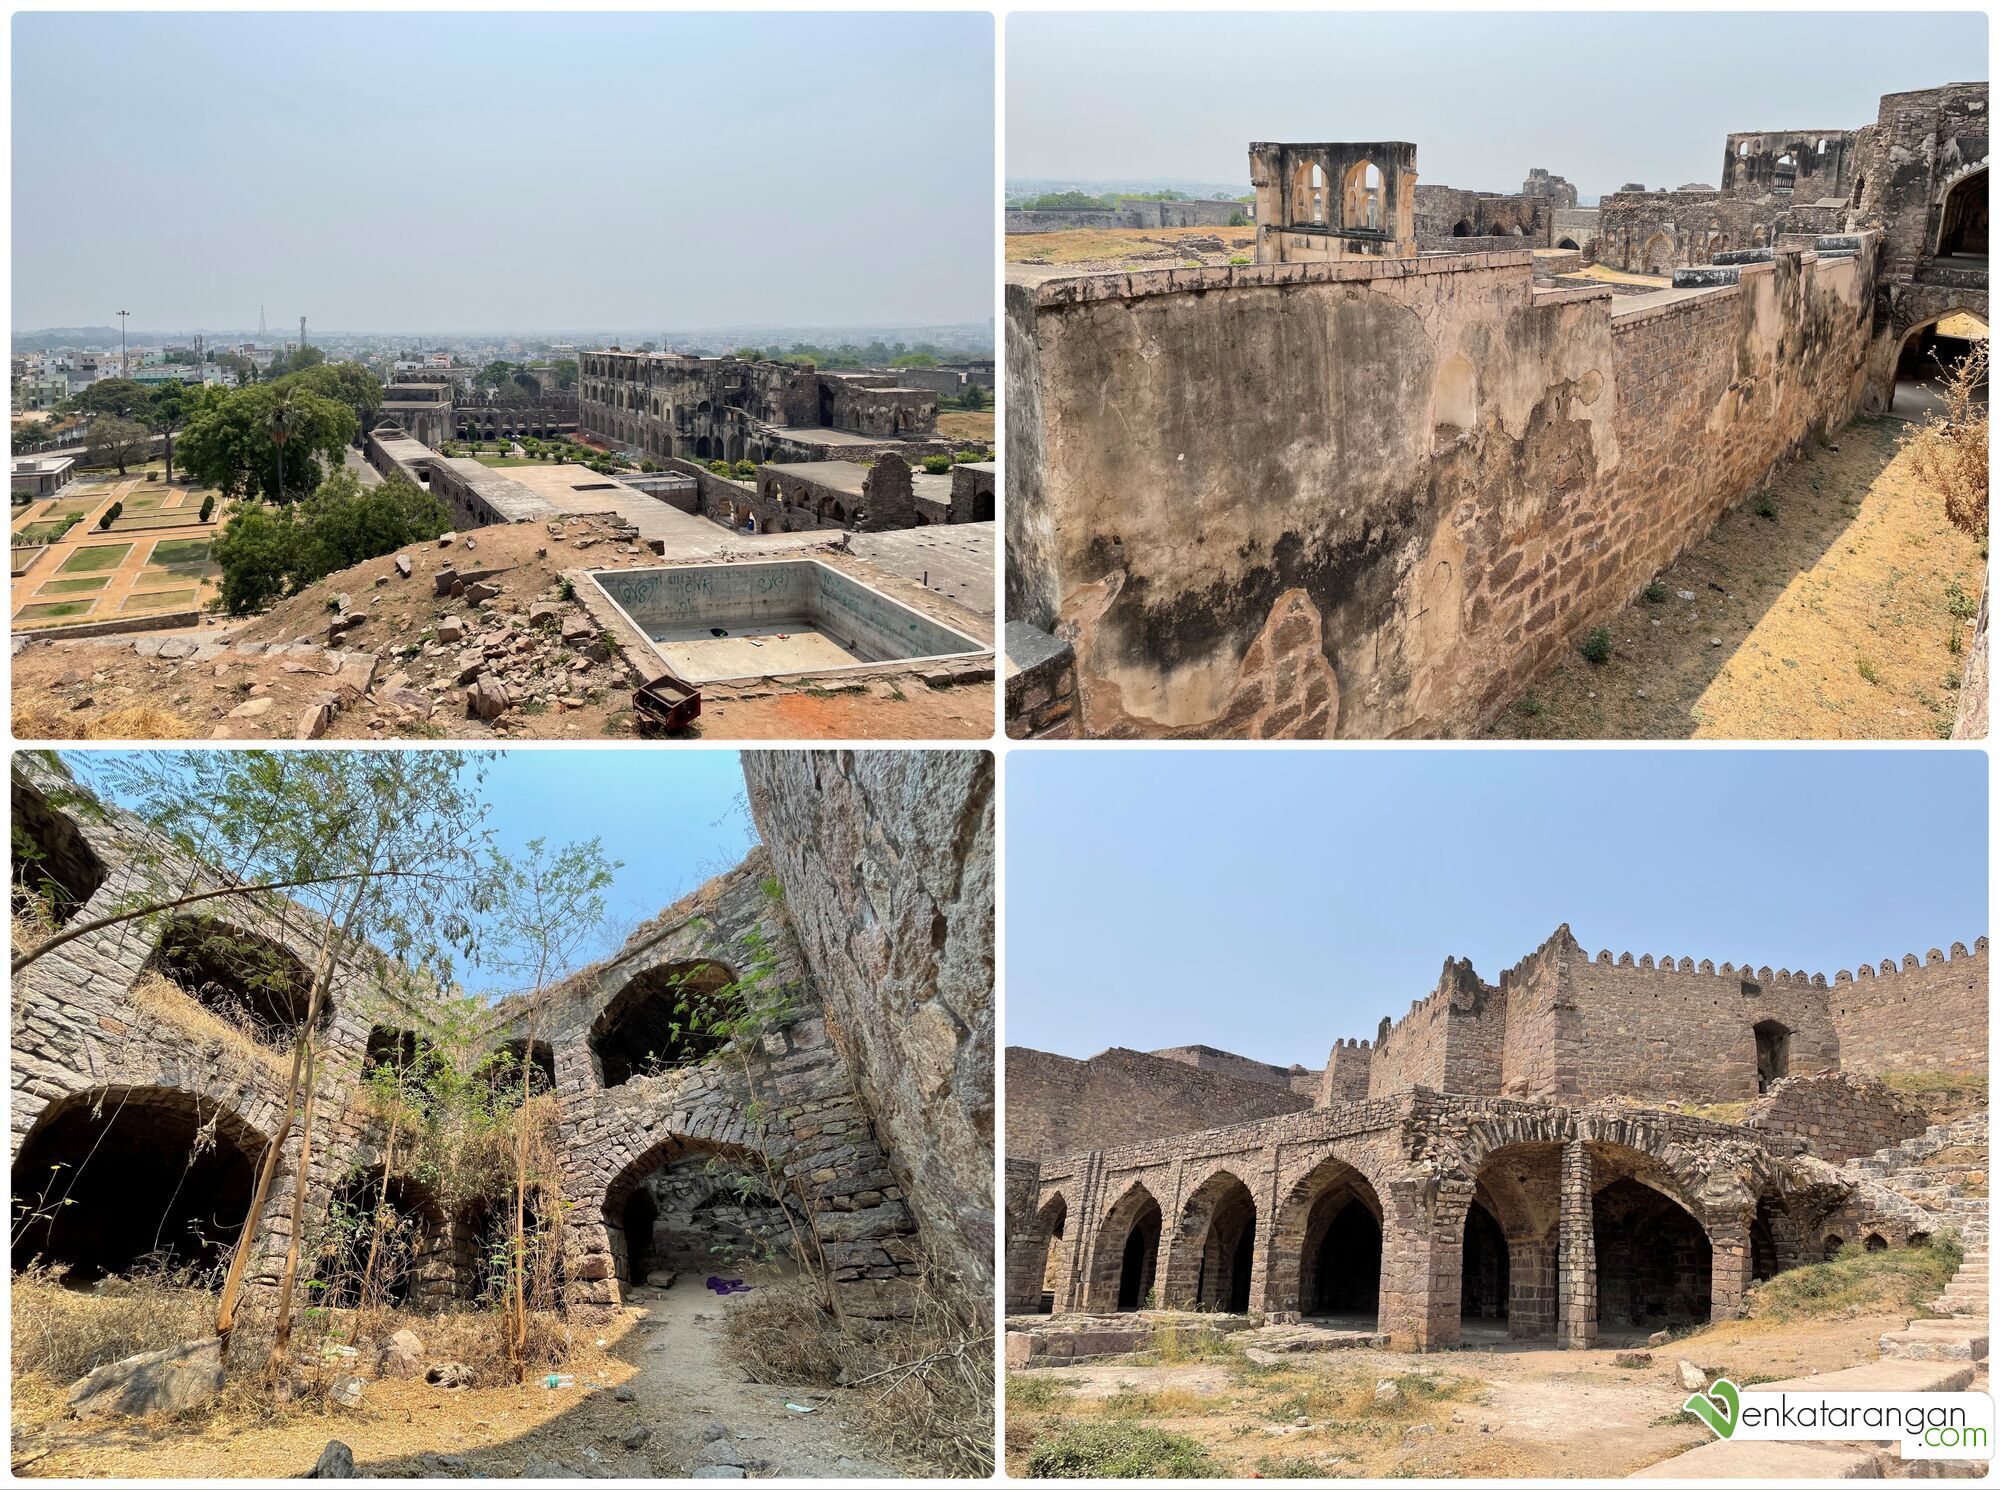 More view of rooms and walls of Golconda Fort